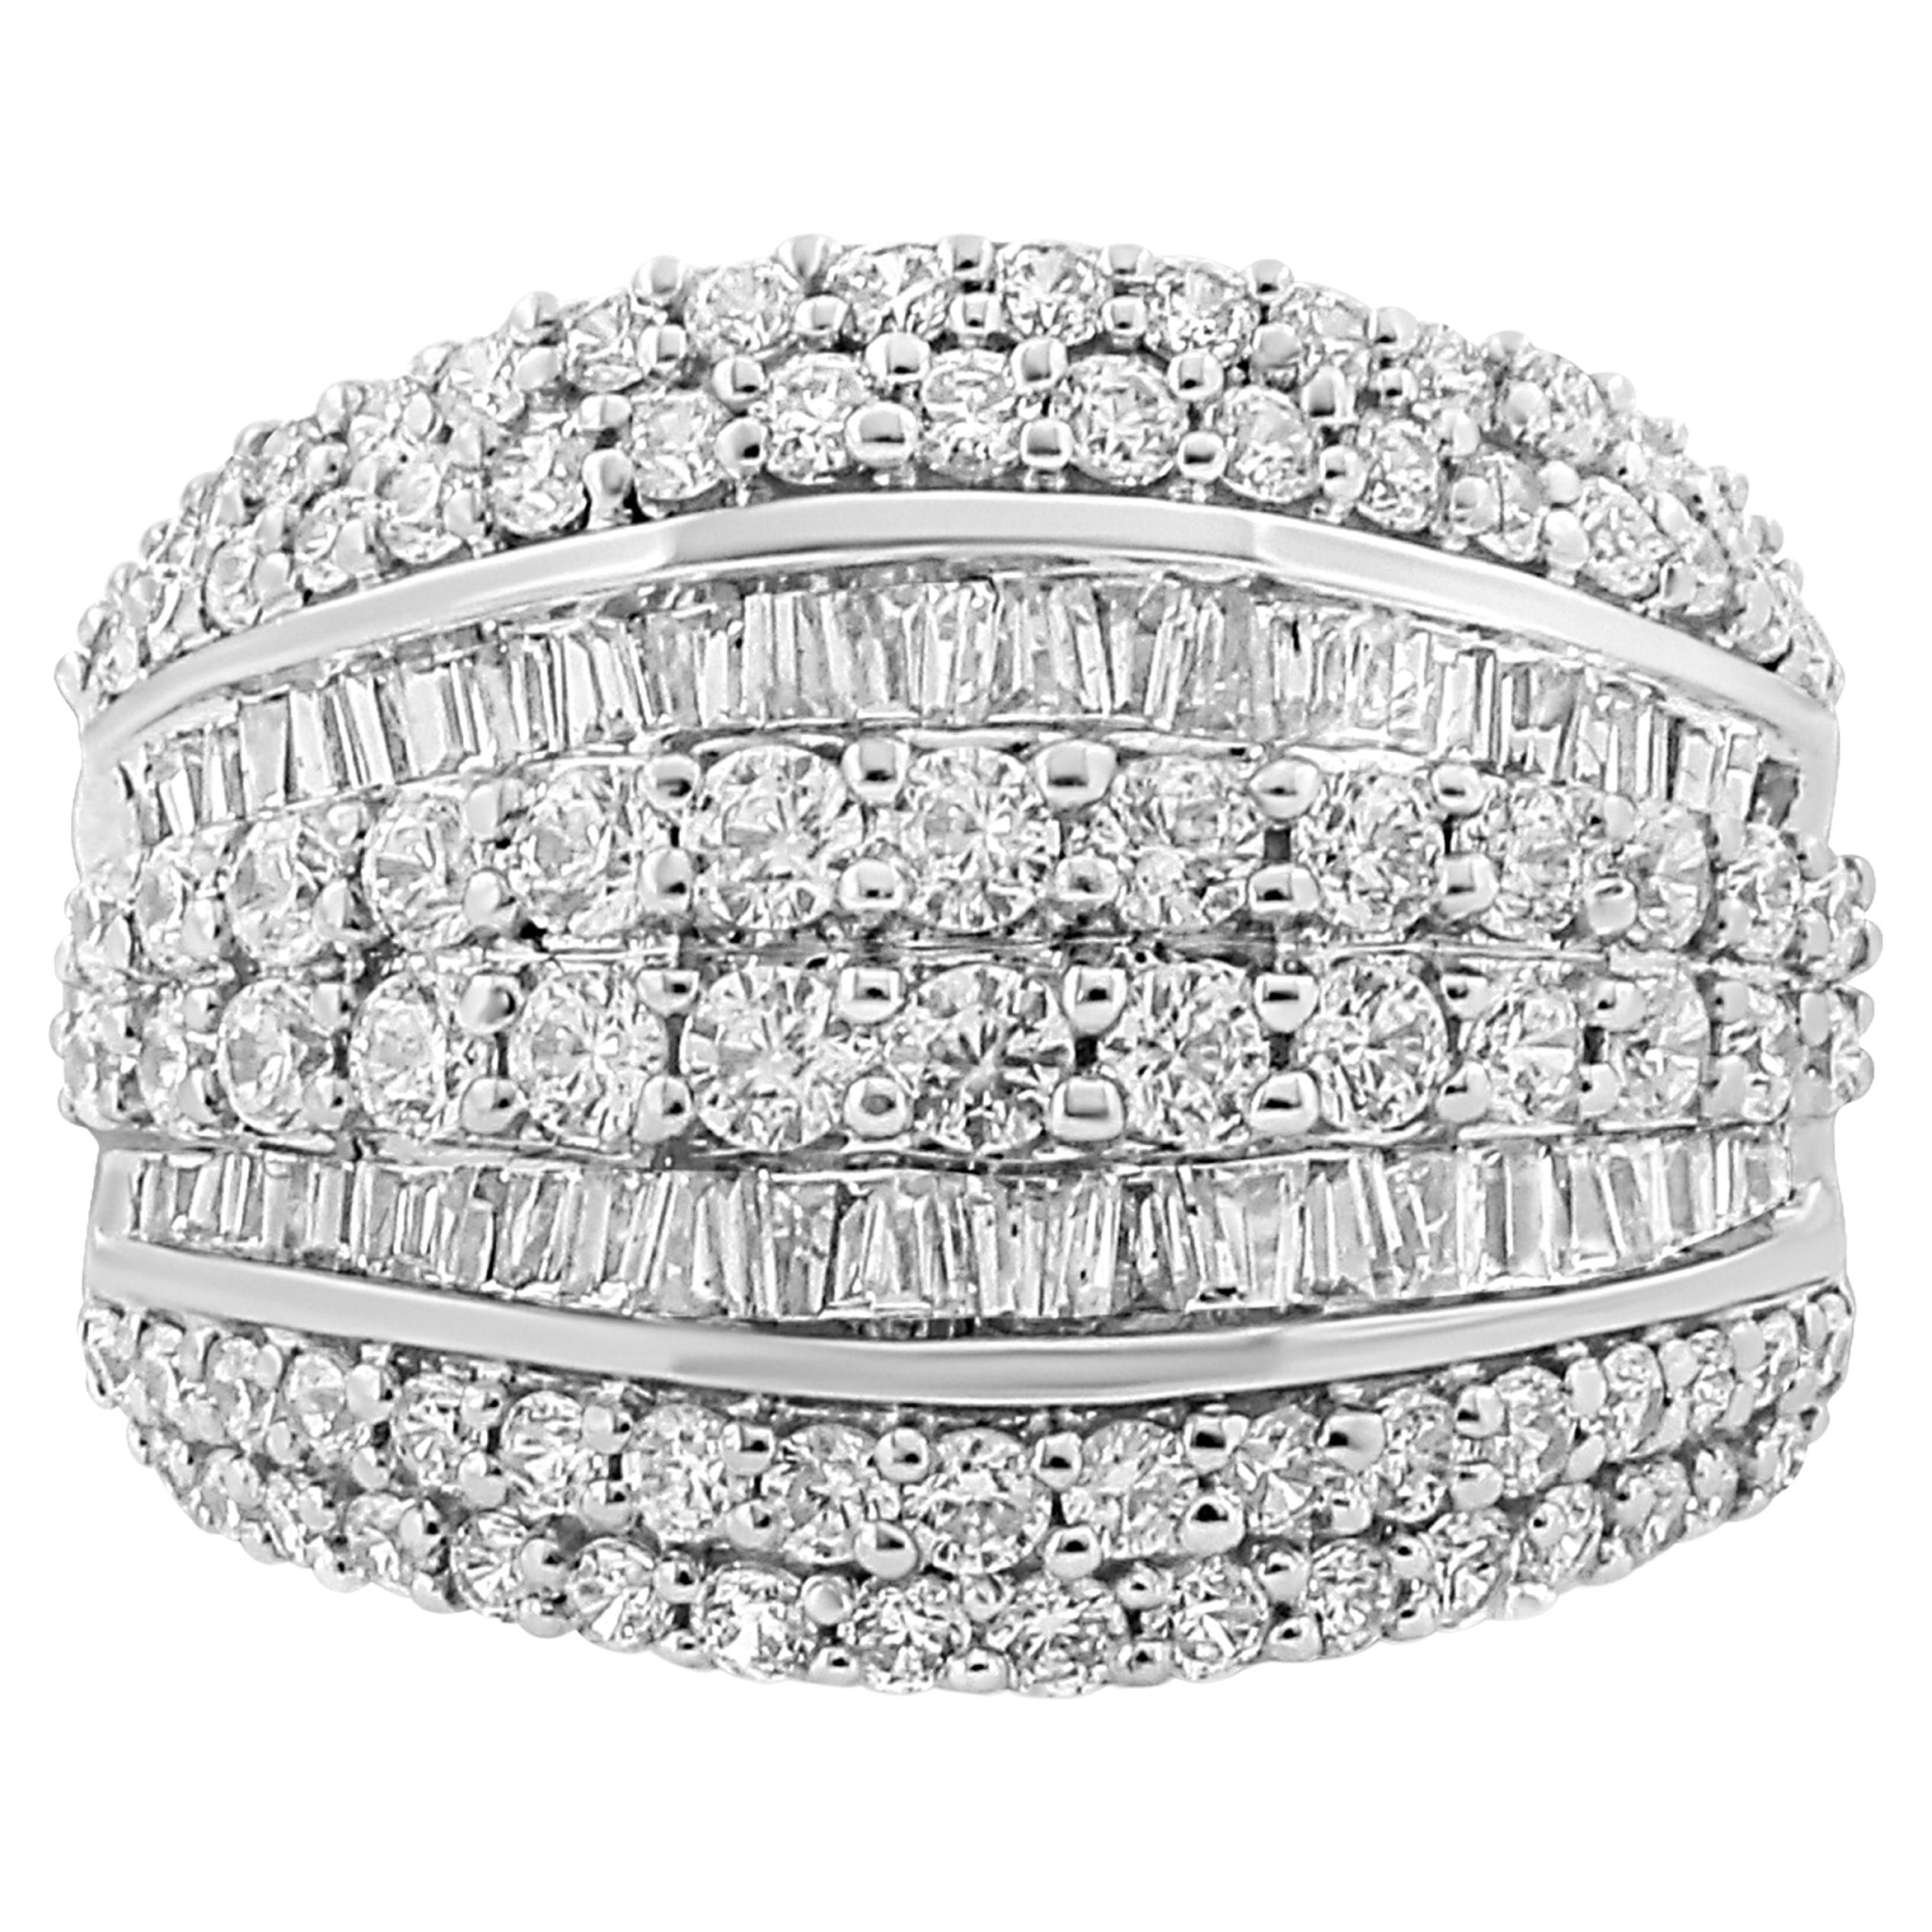 .925 Sterling Silver 2.0 Carat Round and Baguette-Cut Diamond Cluster Ring For Sale